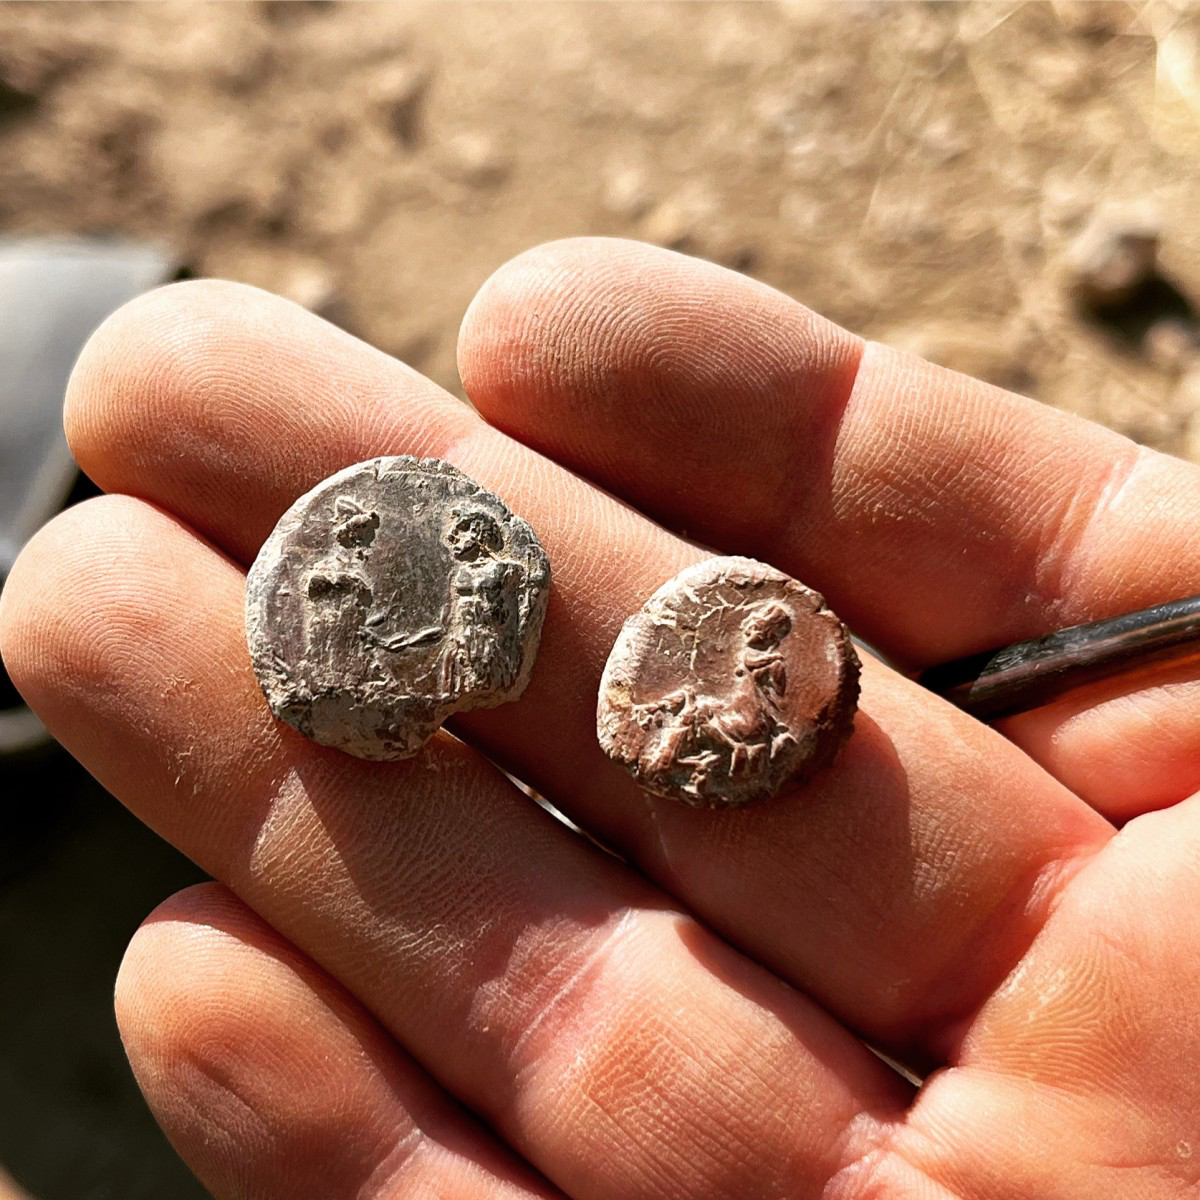 Two impressions of official seals of the city of Doliche
© Asia Minor Research Centre